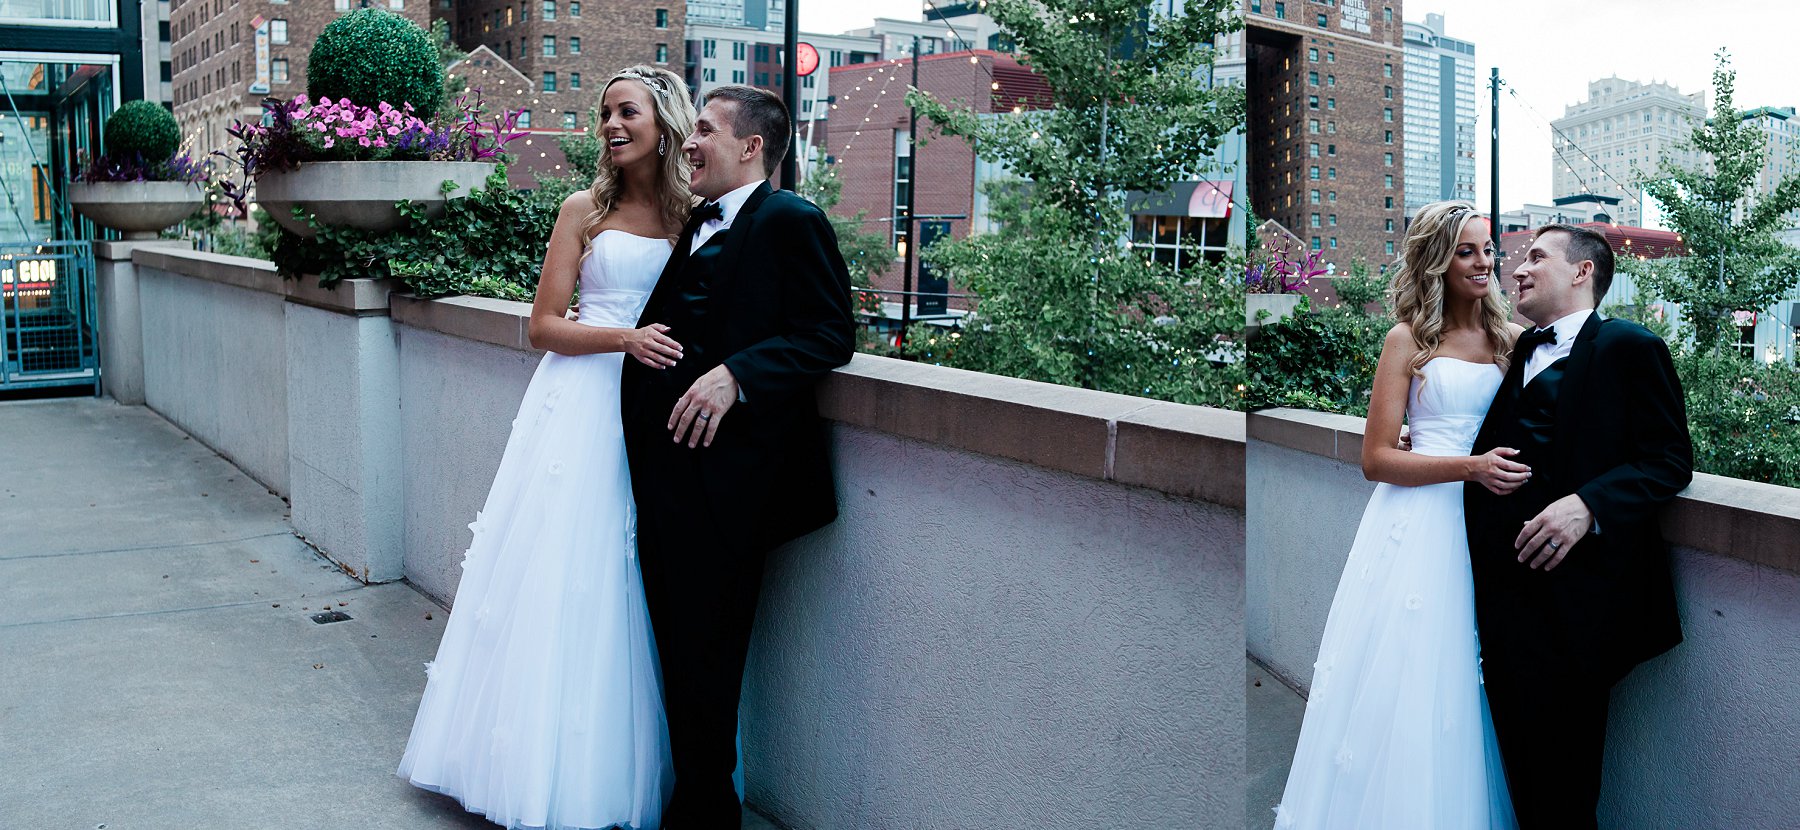 Wedding photography in Kansas City by Merry Ohler